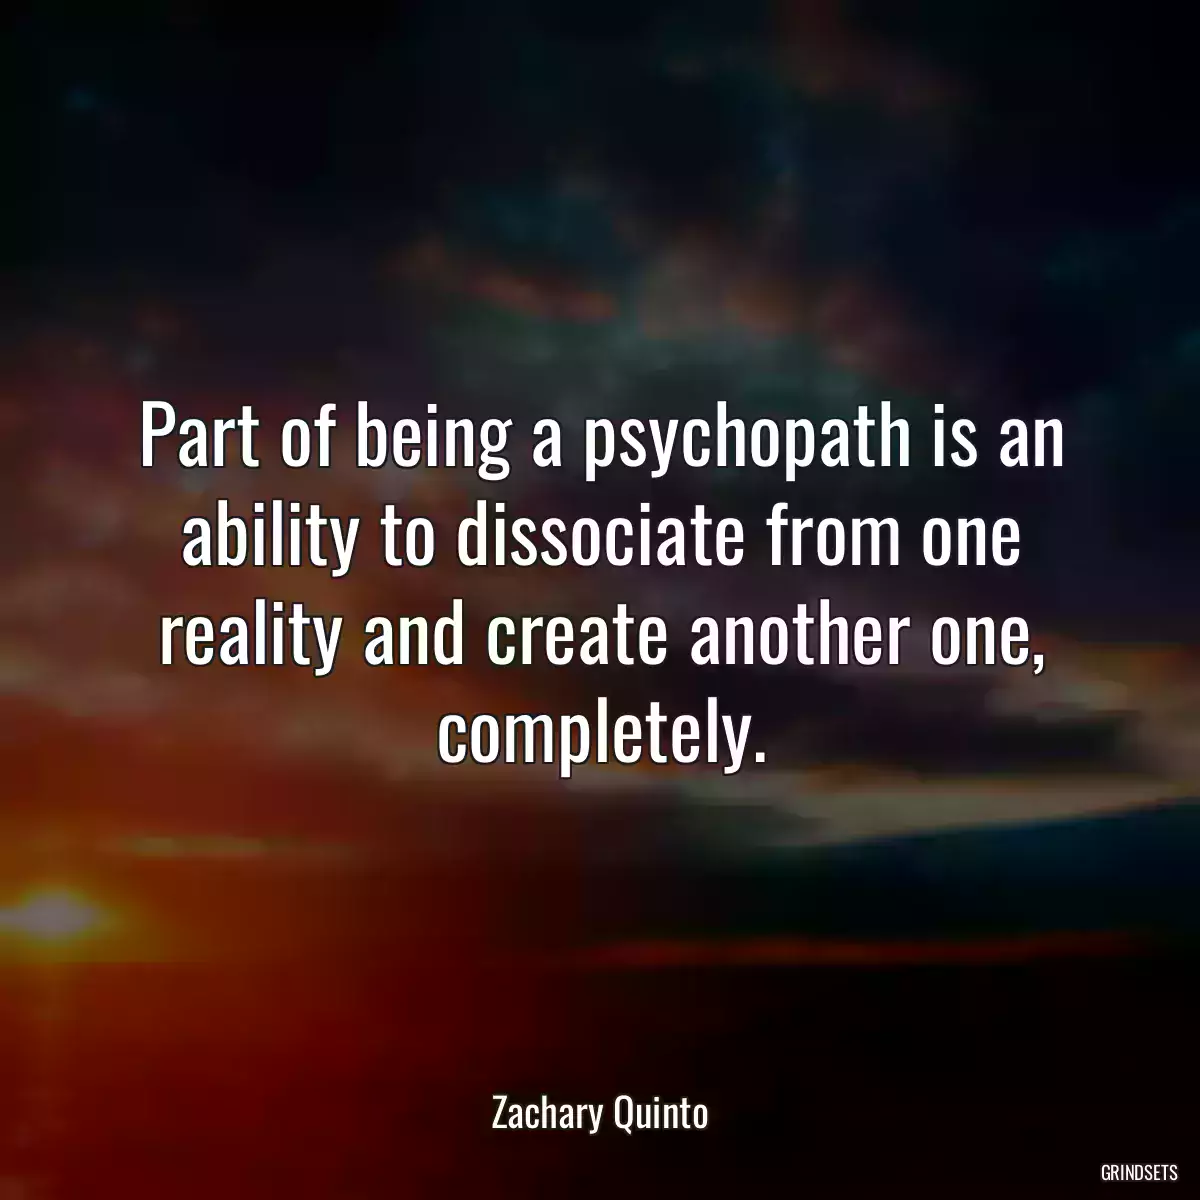 Part of being a psychopath is an ability to dissociate from one reality and create another one, completely.